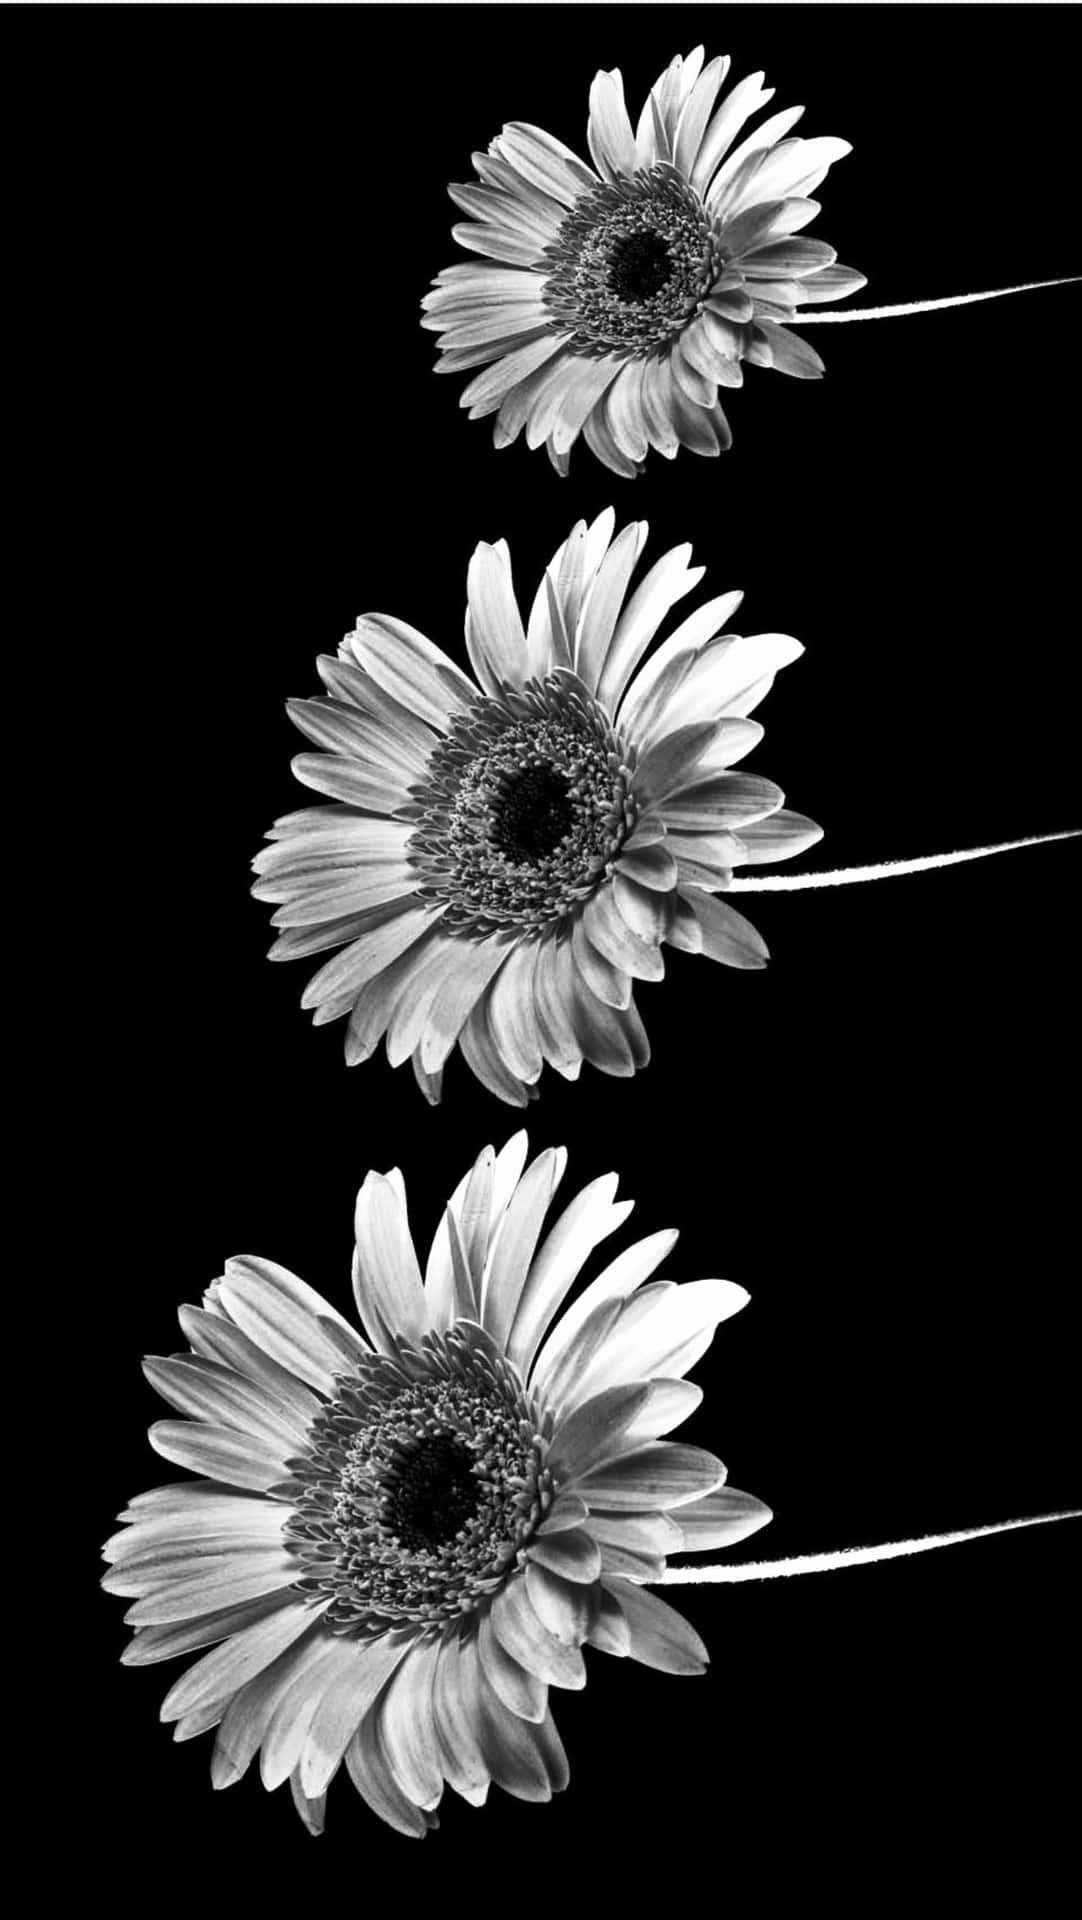 Three Daisies In Black And White On A Black Background Wallpaper